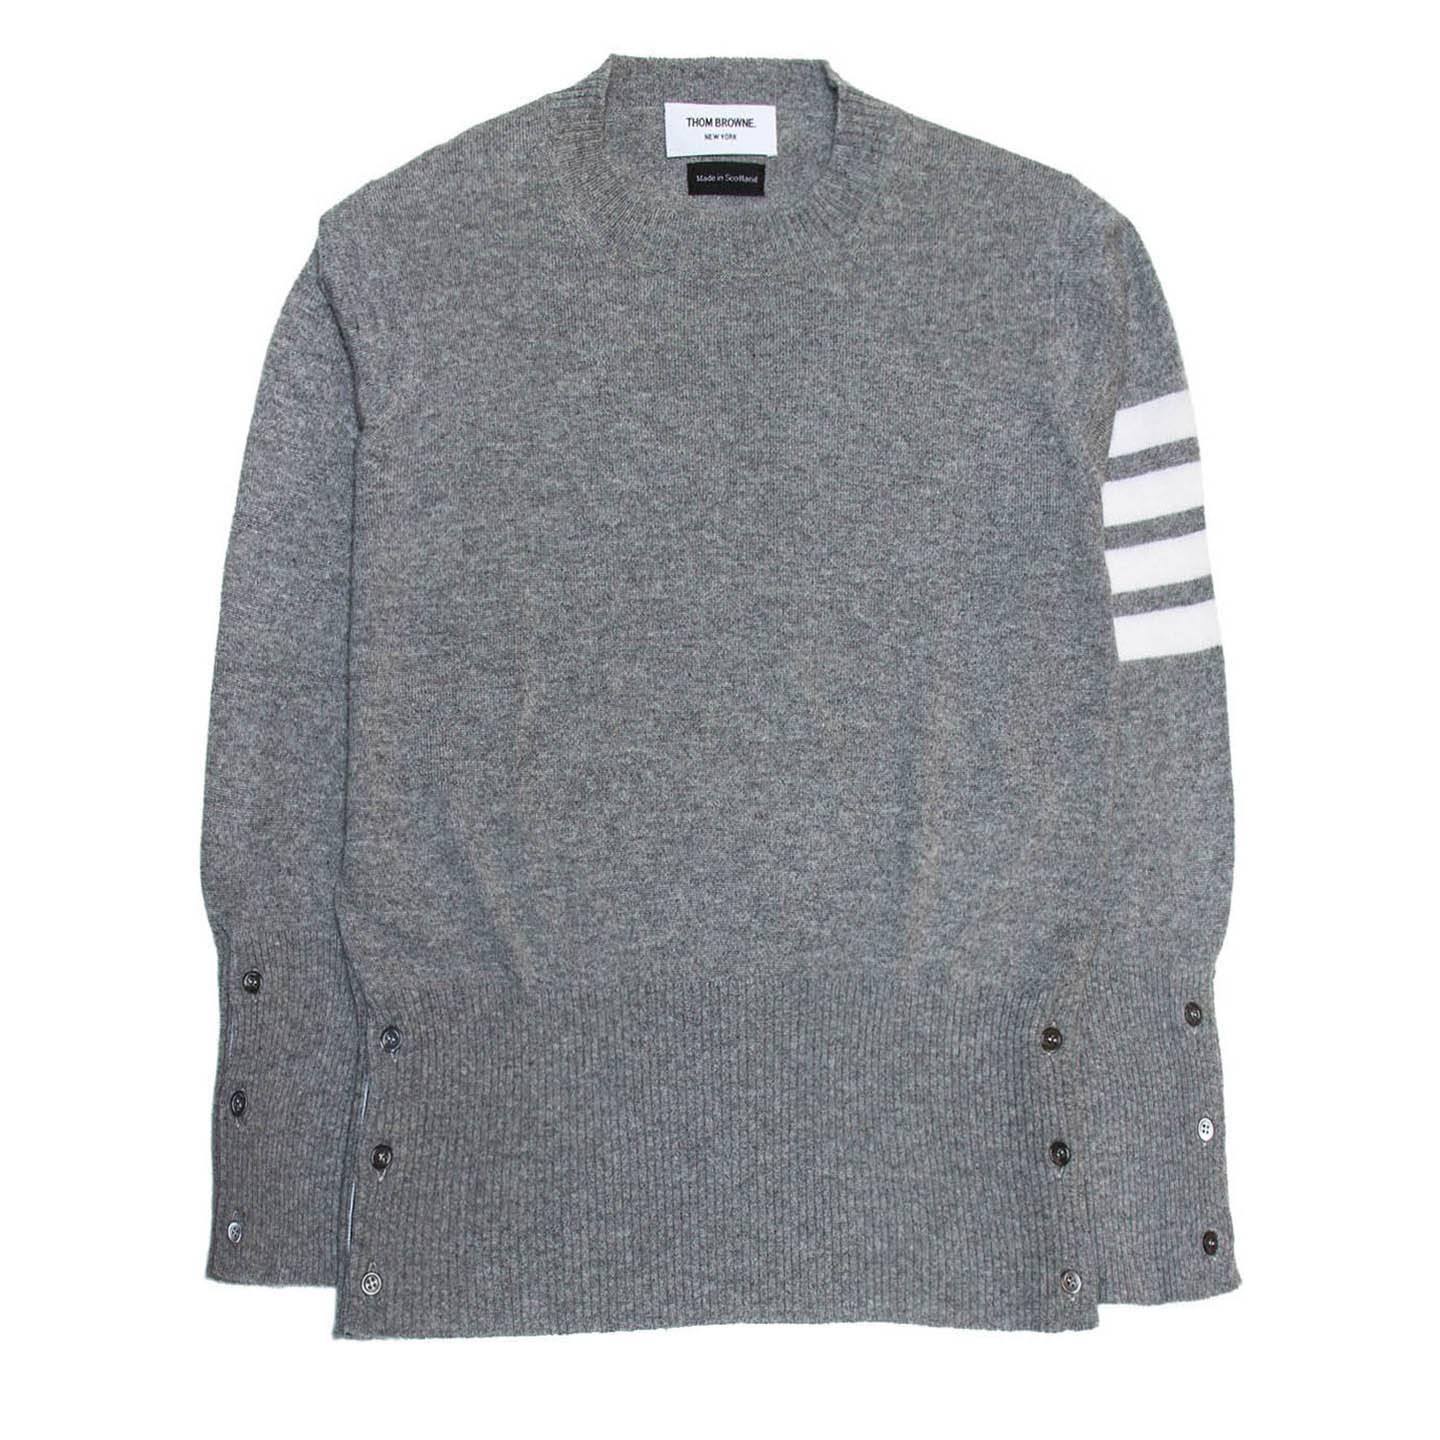 Grey cashmere crew neck pullover with four ivory jersey style stripes on left top sleeve. Hem and cuffs fasten with dark grey buttons and show a blue/red/white striped ribbon when open. Made in Scotland. Made for Men Worn by Women too.

Size